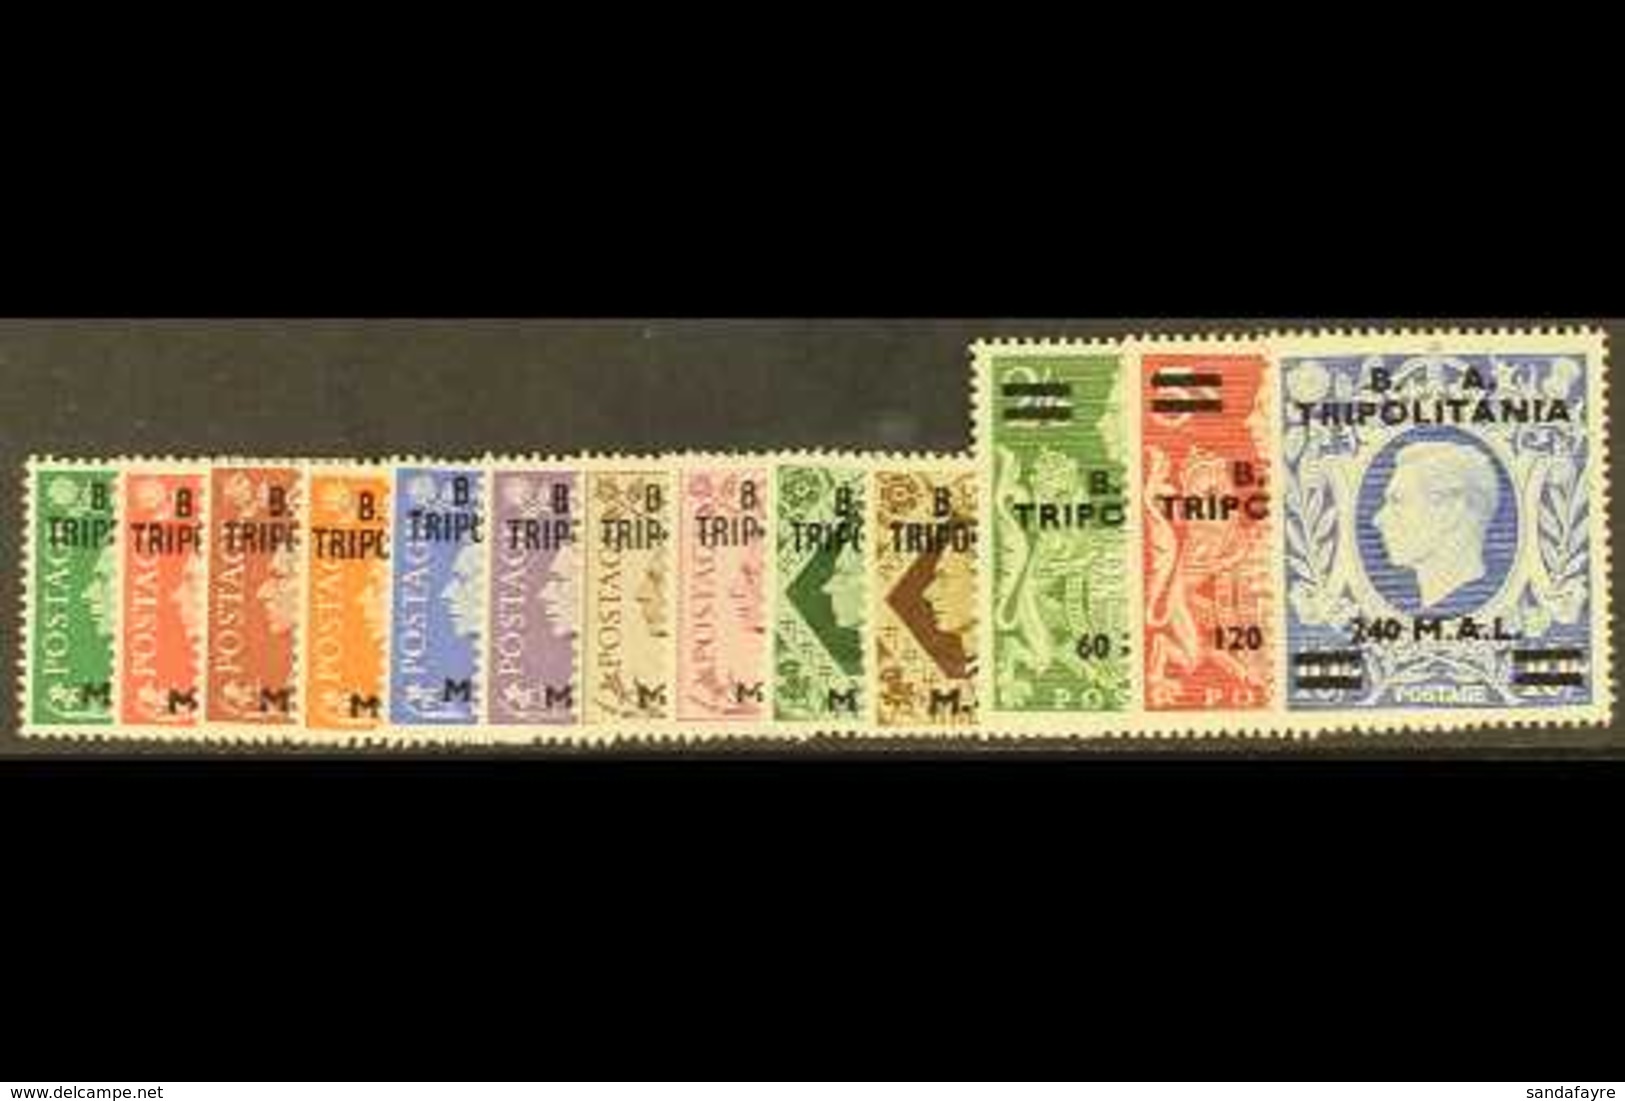 TRIPOLITANIA 1950 B.A. Surcharge Set Complete, SG T14/26, Very Fine Never Hinged Mint. (13 Stamps) For More Images, Plea - Africa Oriental Italiana